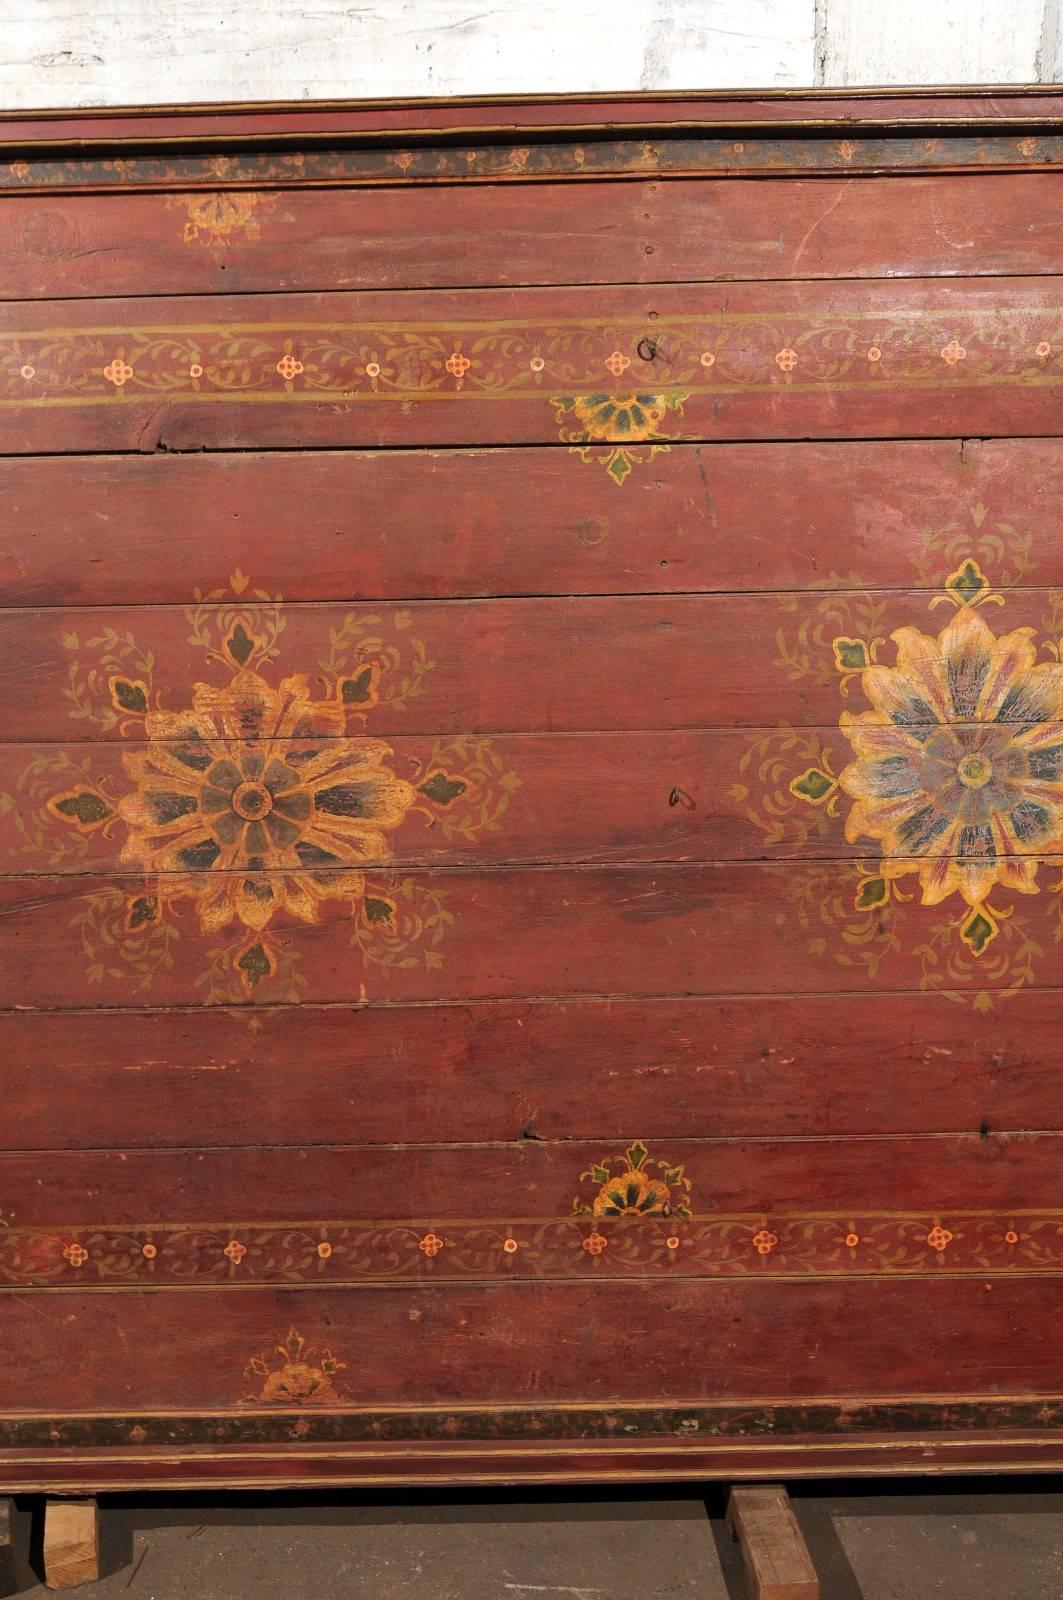 19th Century A Grand-Sized 19th C. Beautifully Painted Ceiling Panel from South India For Sale